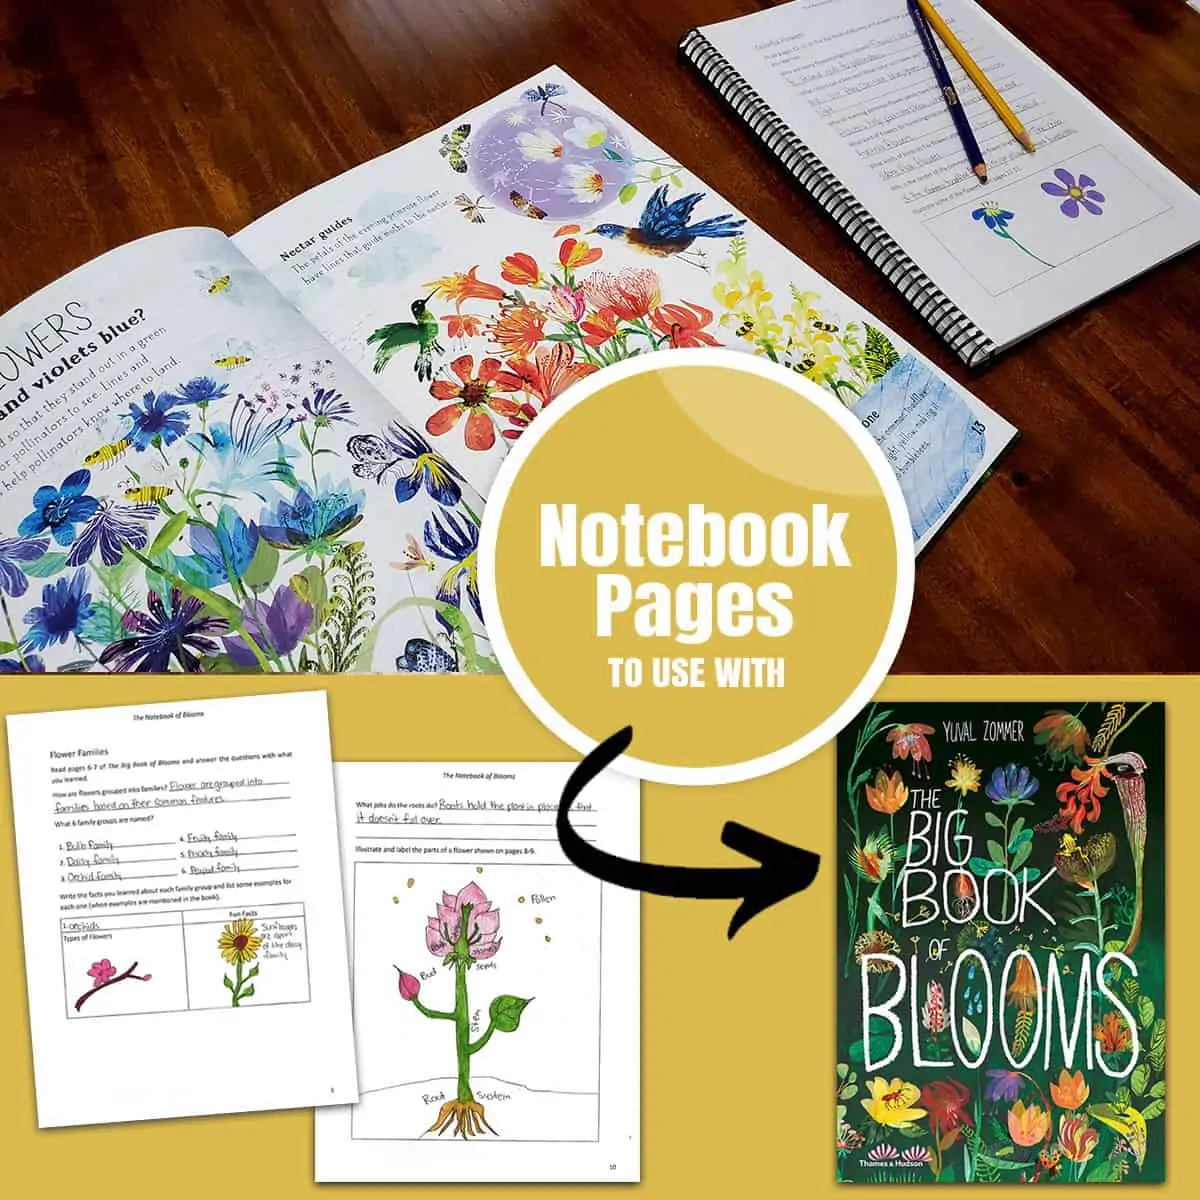 Notebook Pages to use with The Big Book of Blooms